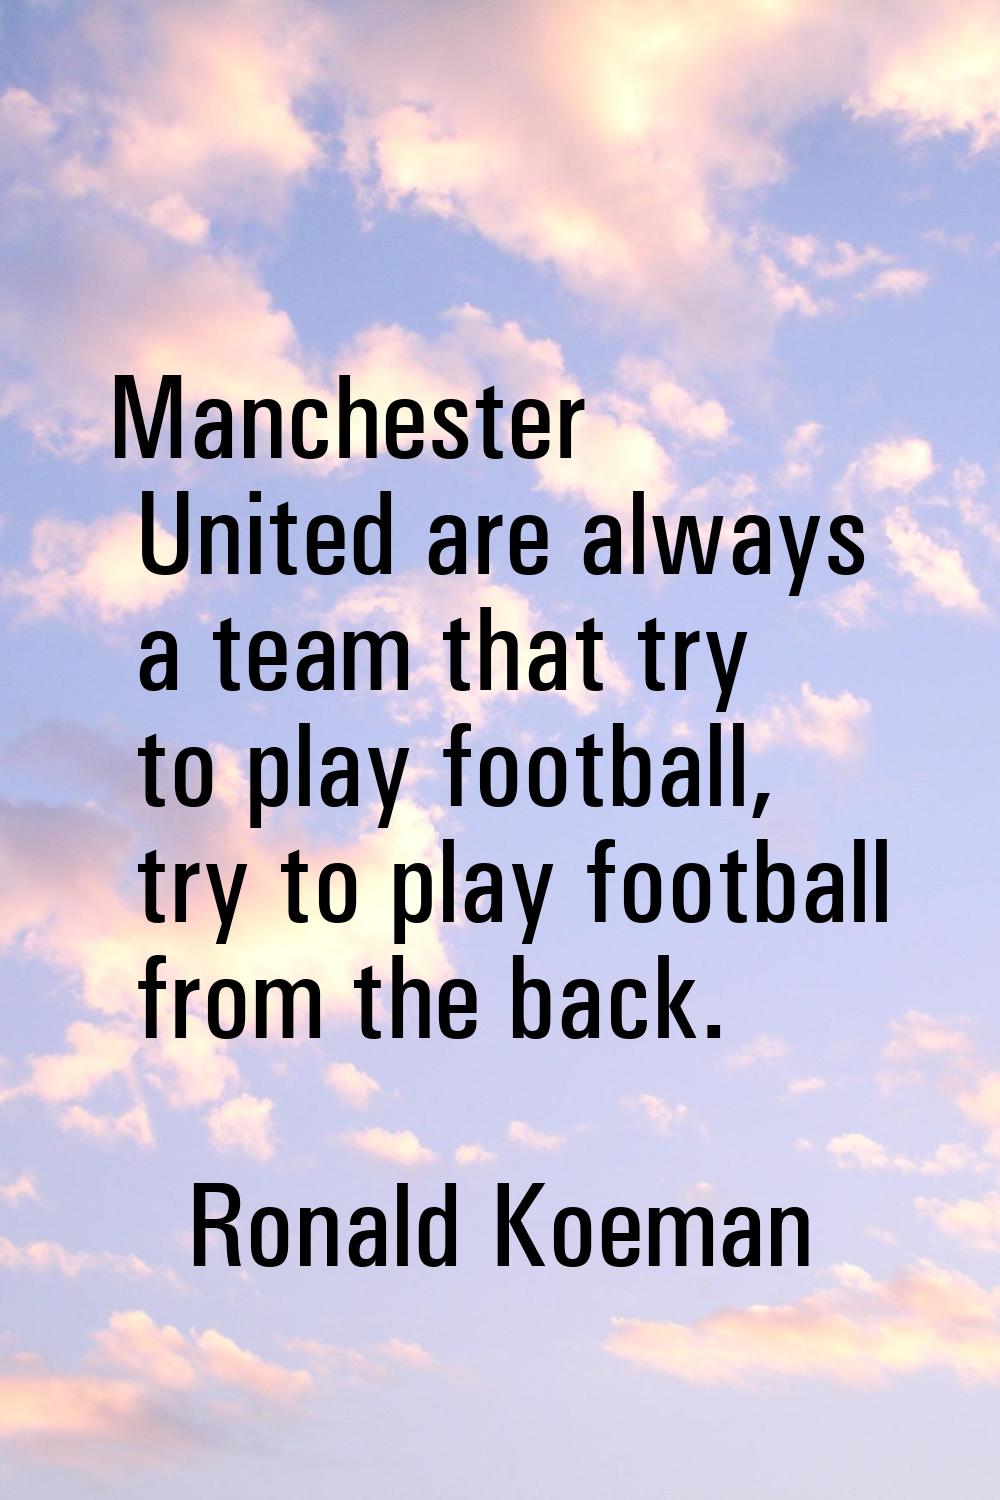 Manchester United are always a team that try to play football, try to play football from the back.